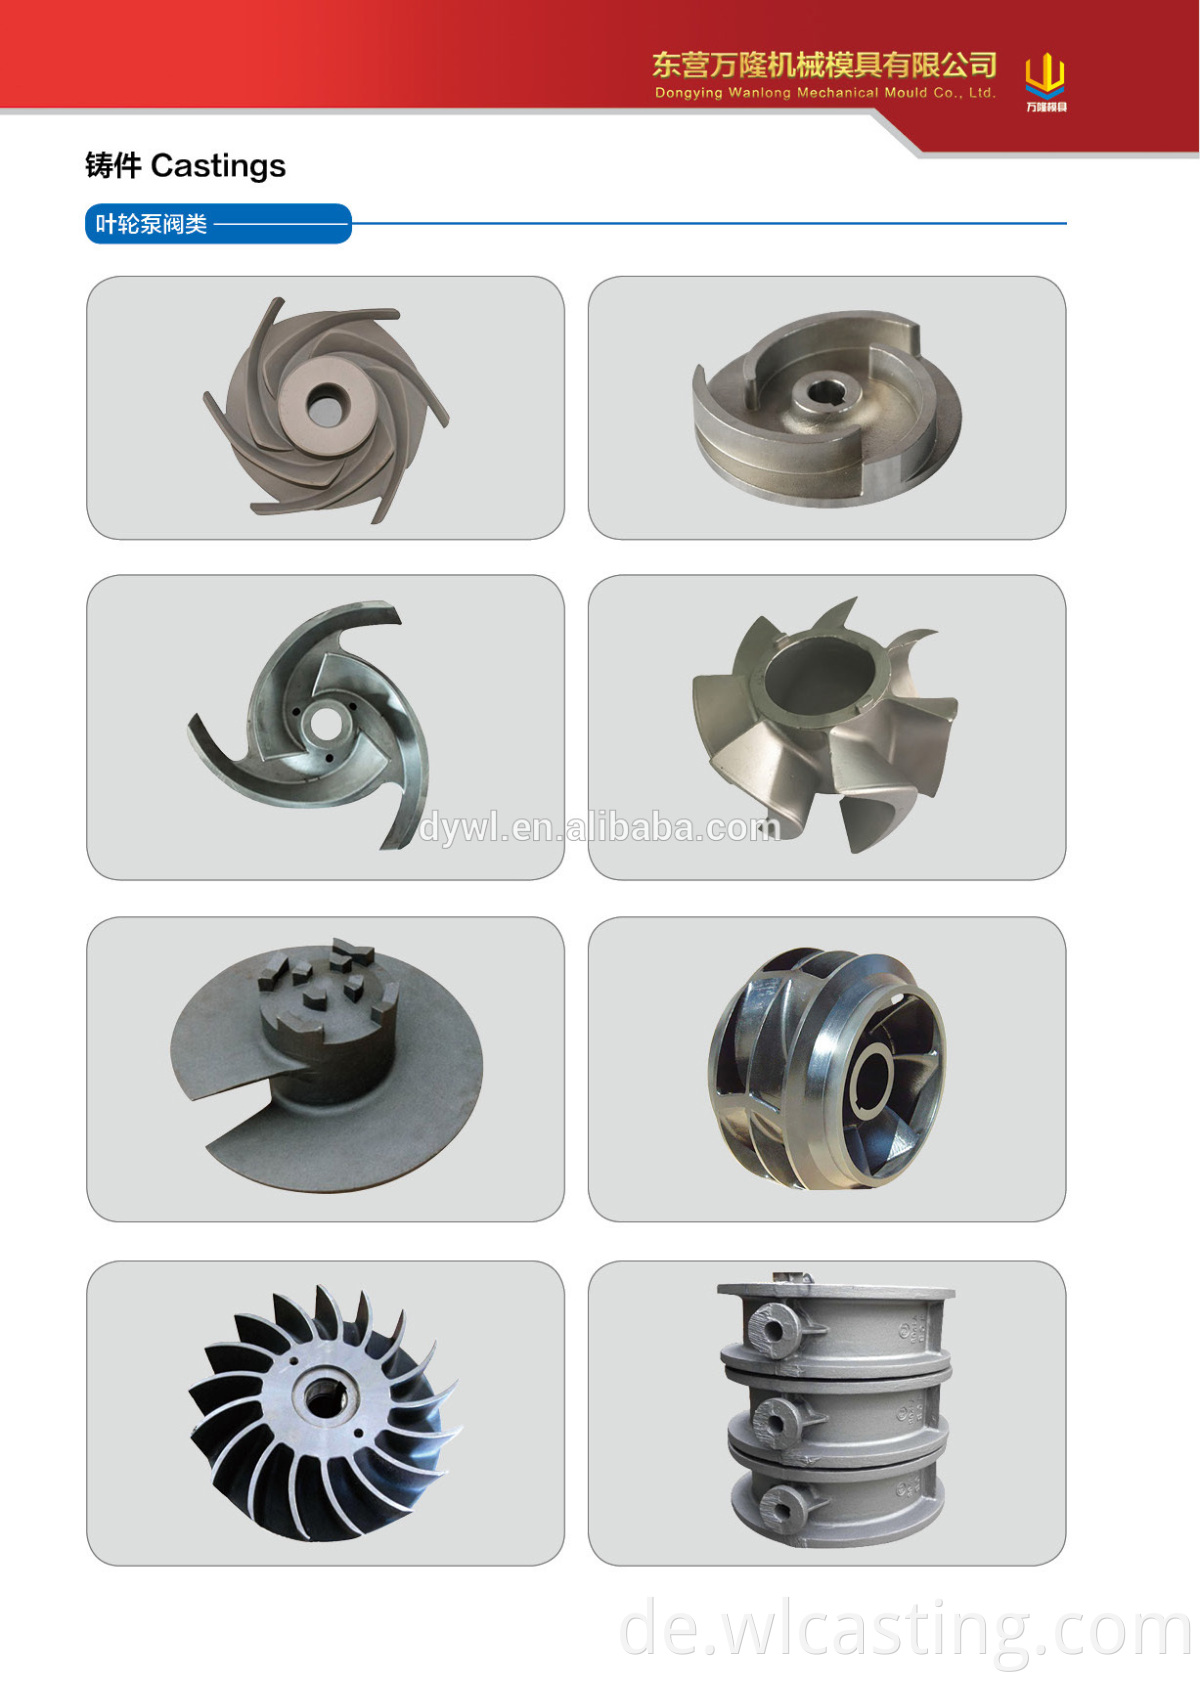 investment casting cnc machining pump impeller mold mould China foundry